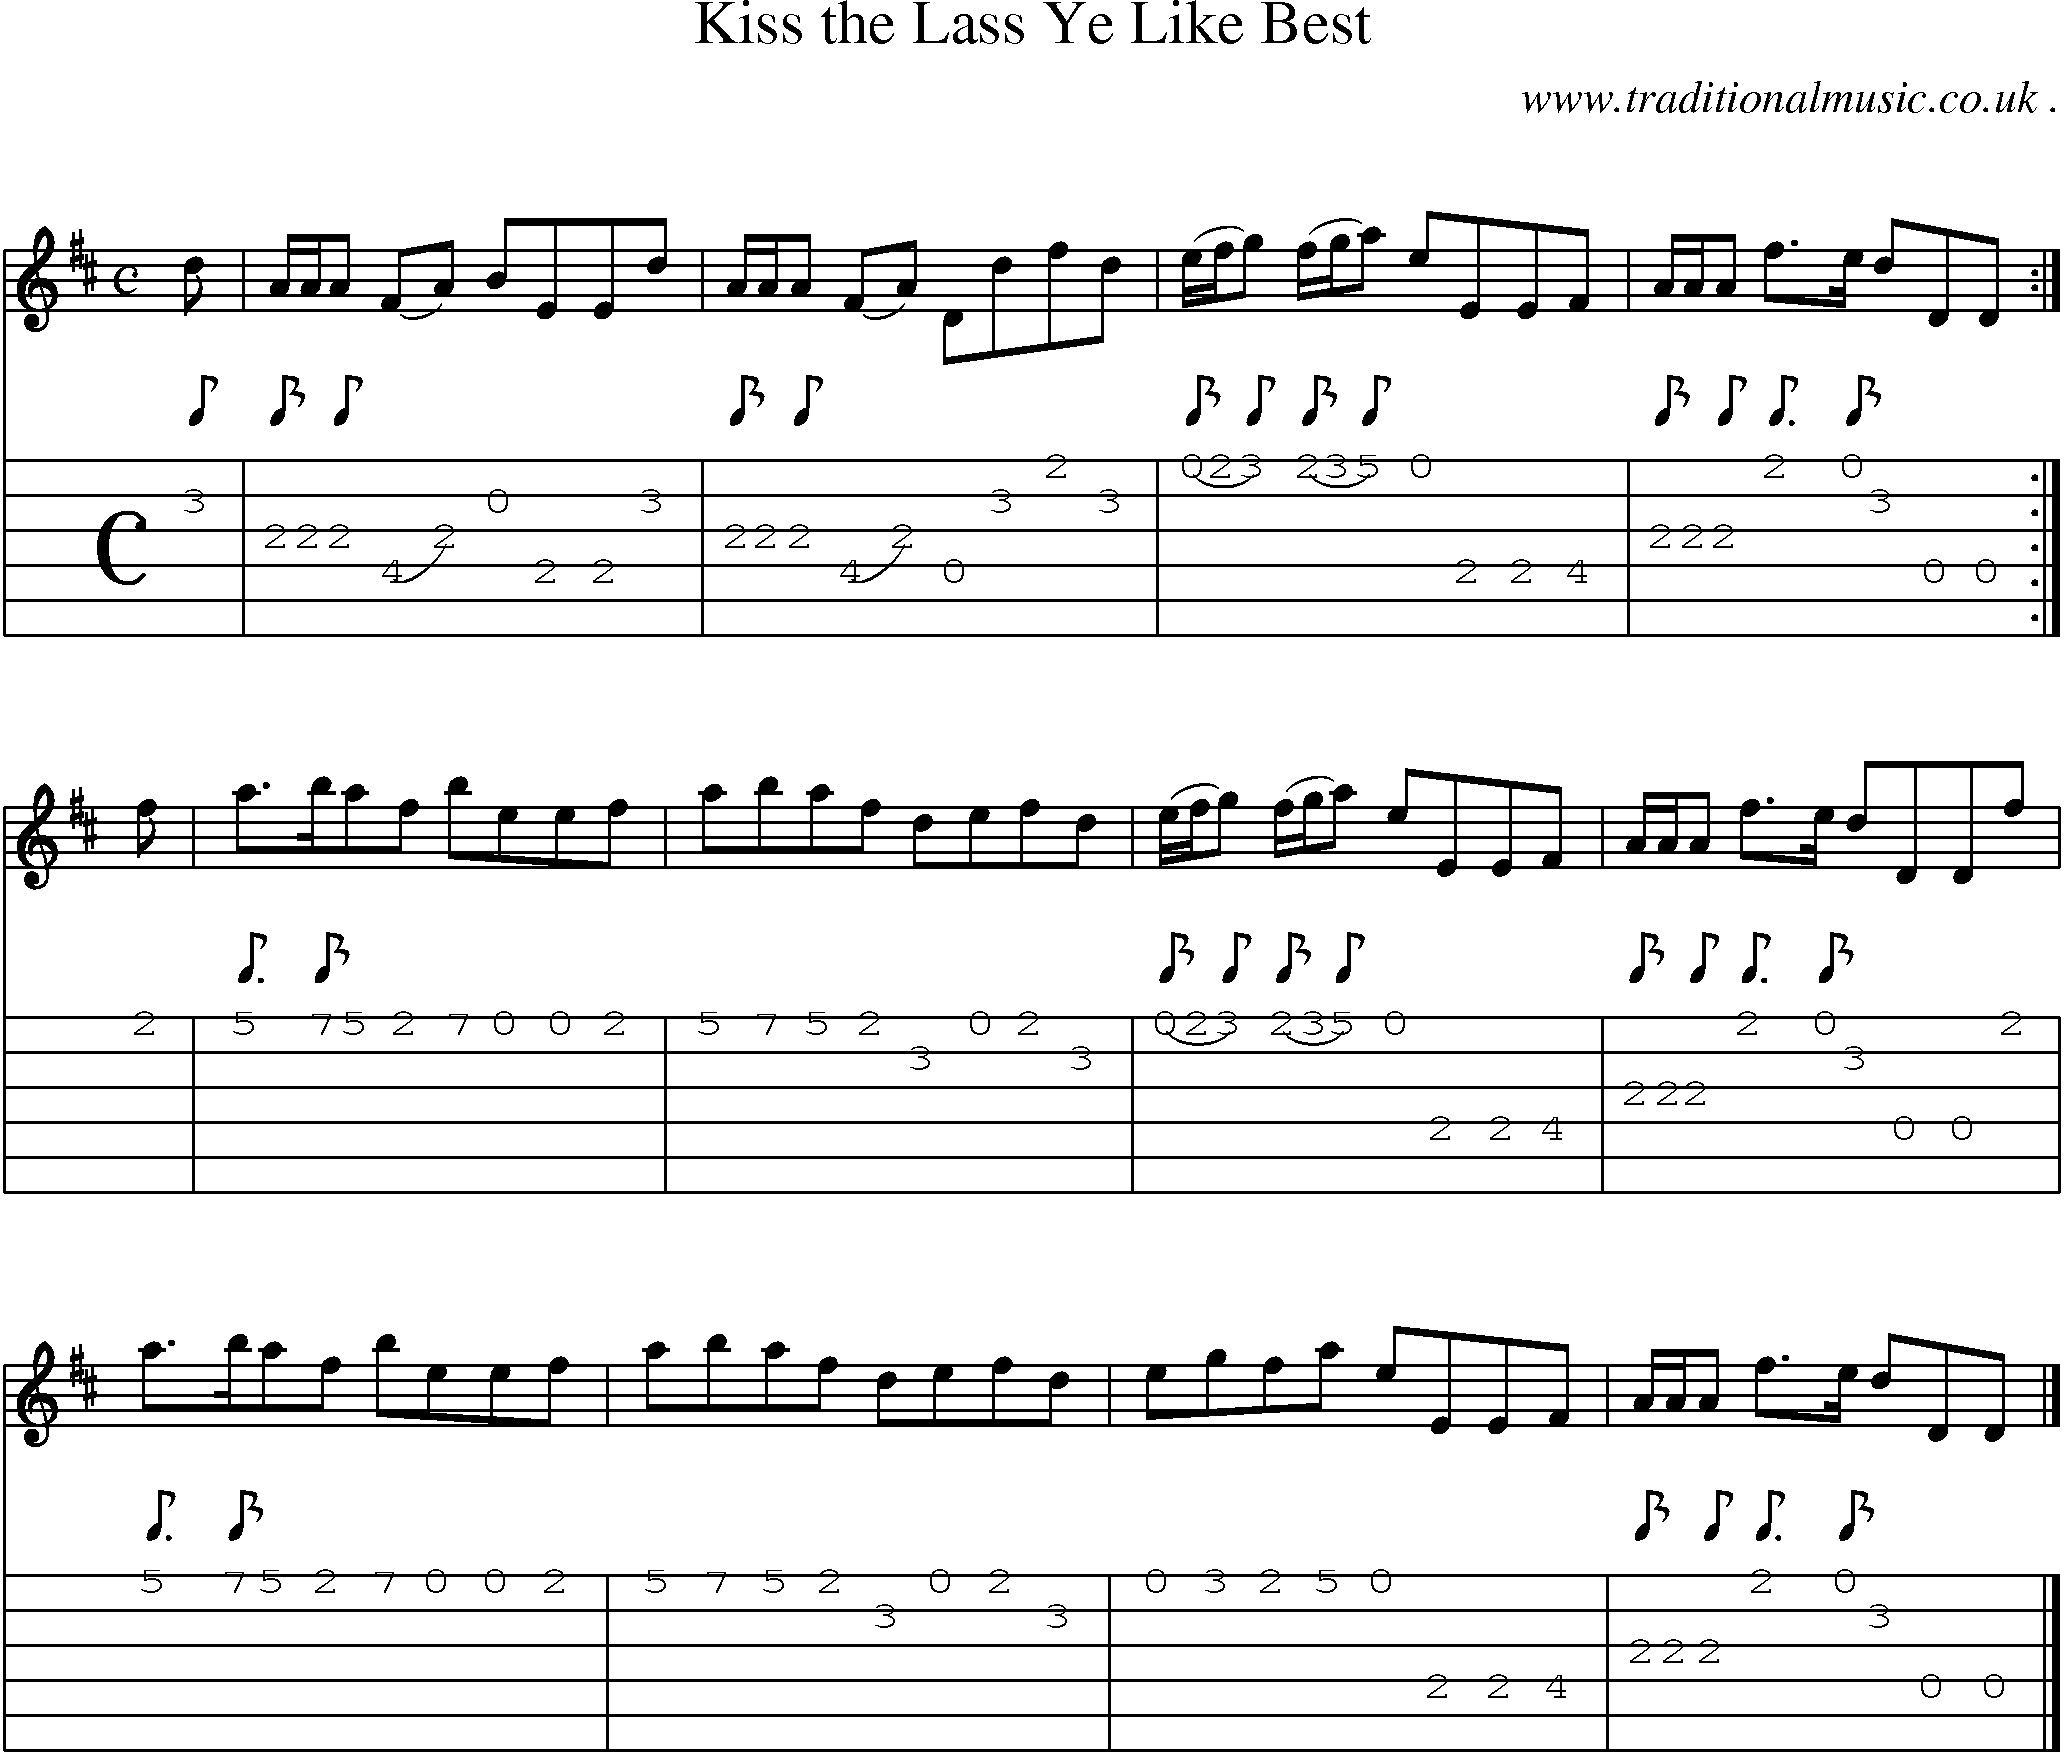 Sheet-music  score, Chords and Guitar Tabs for Kiss The Lass Ye Like Best